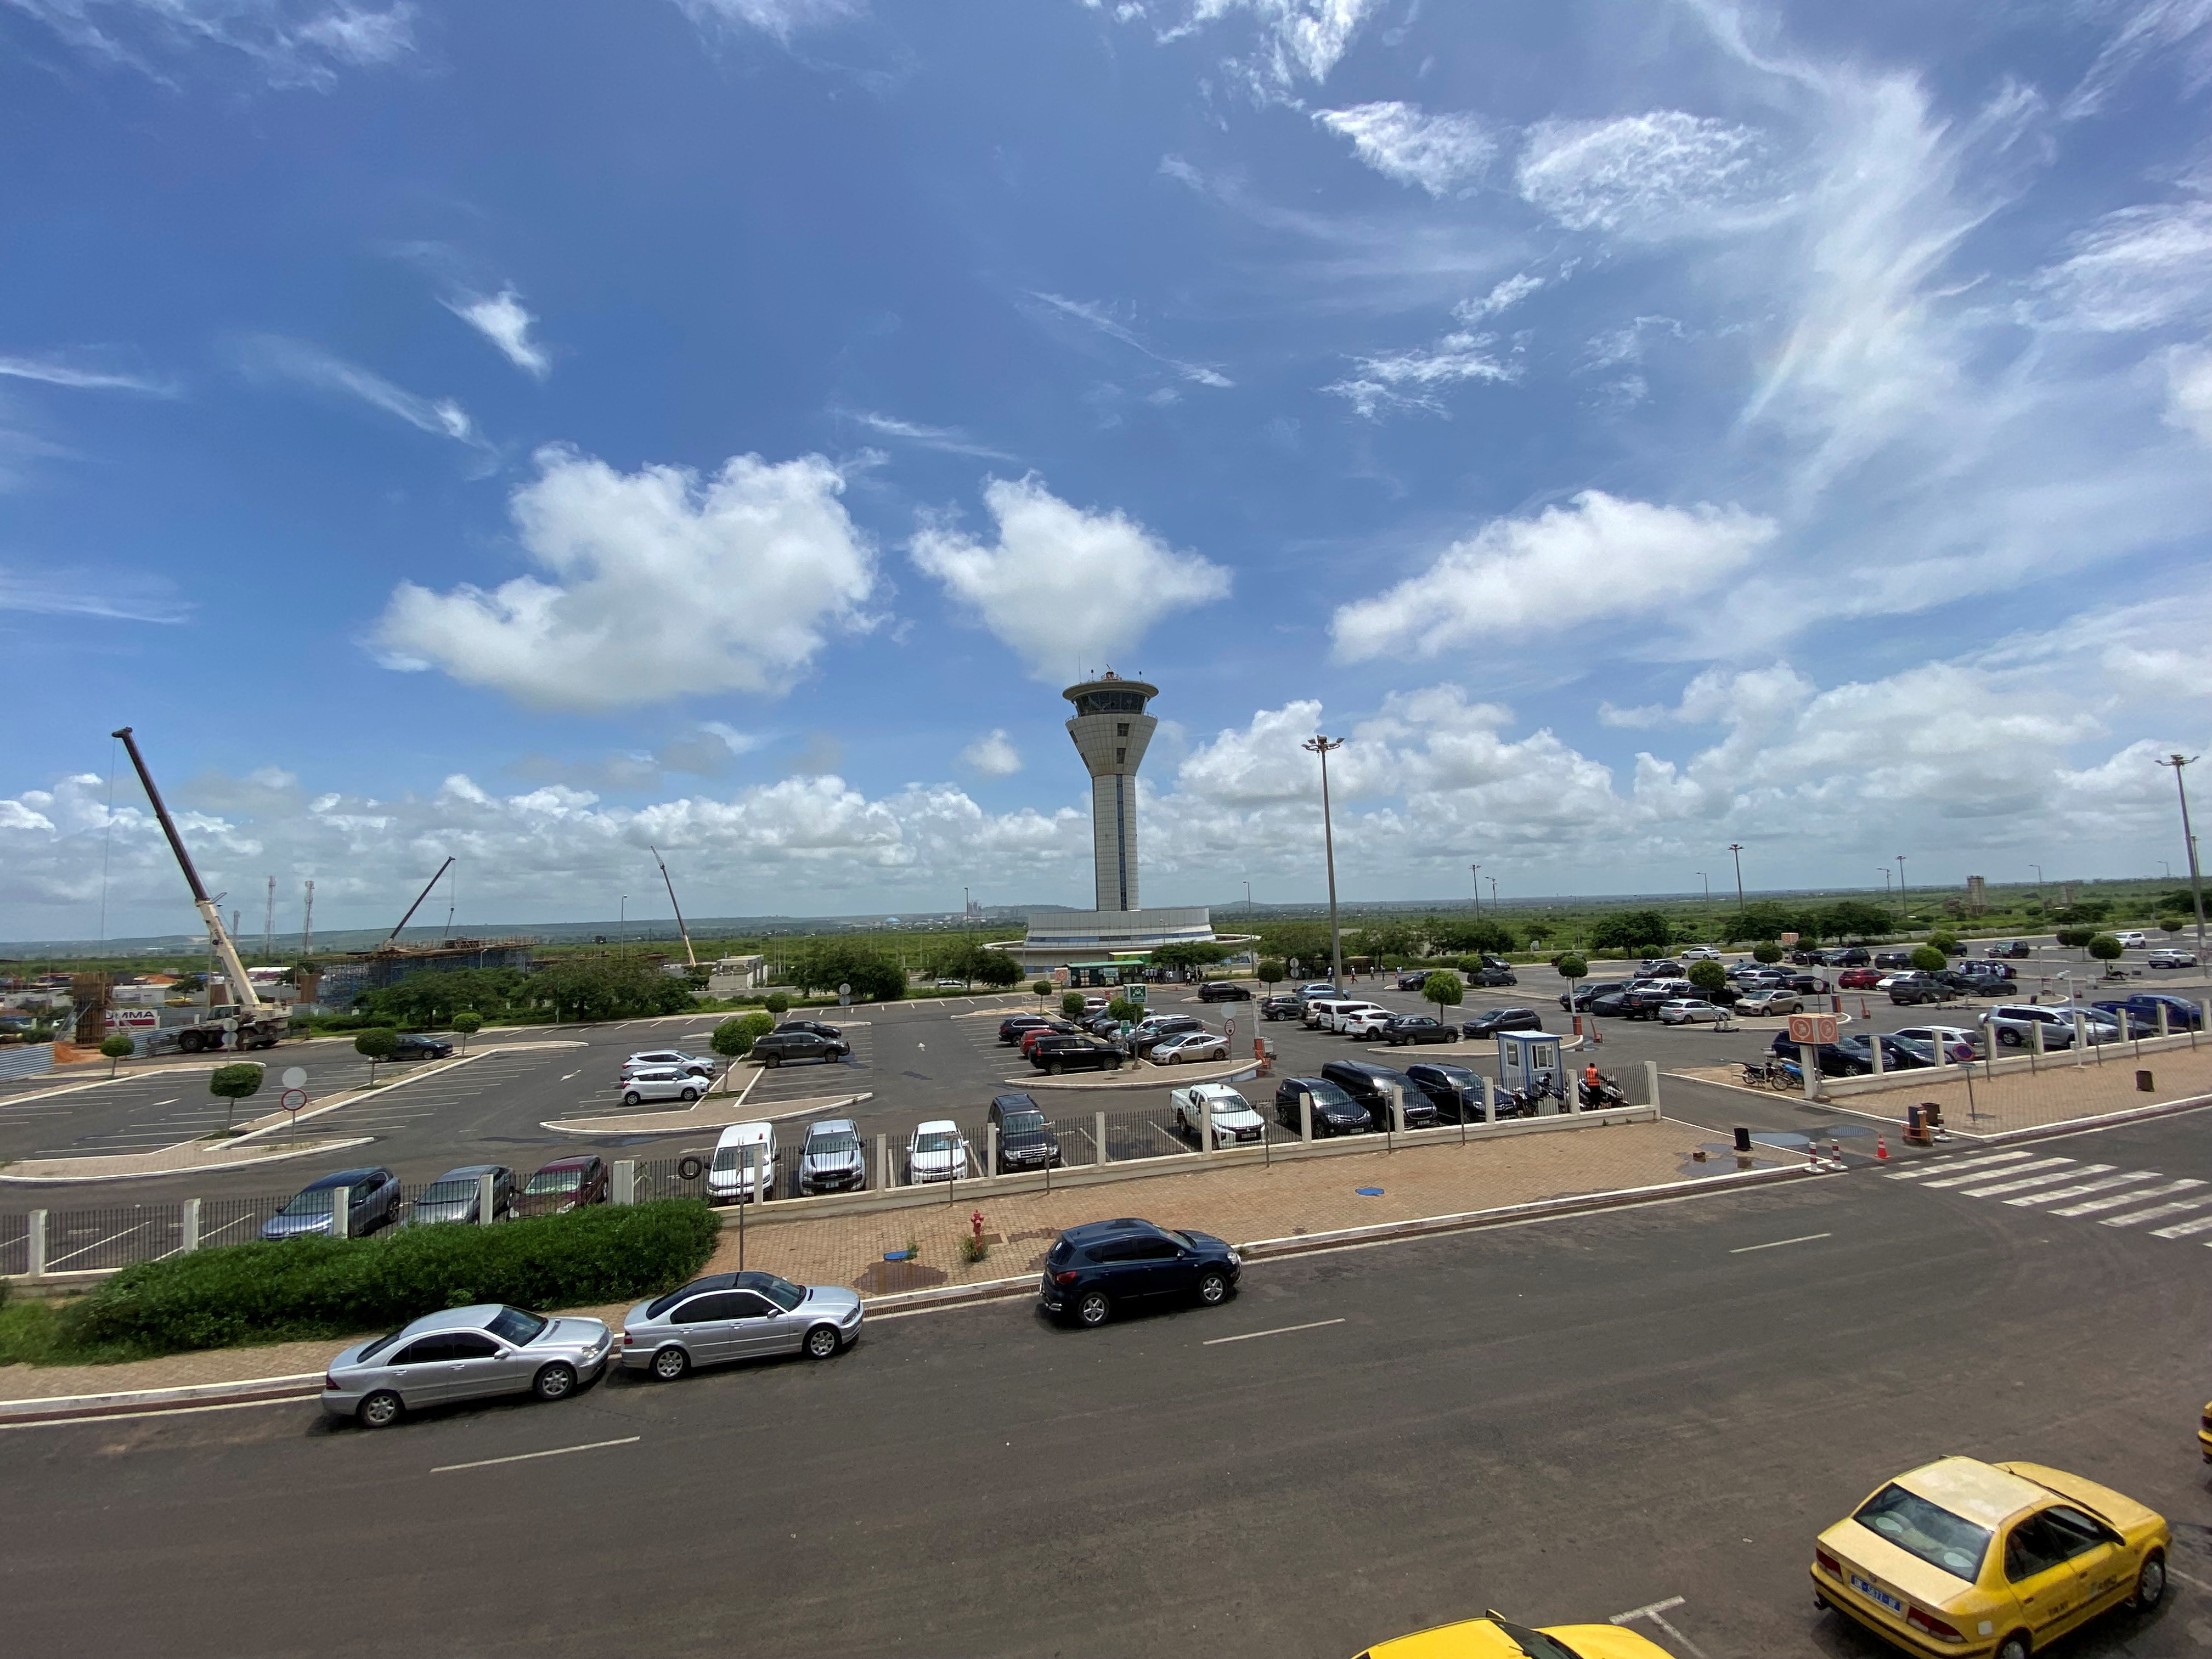 Air traffic control strike disrupts flights across West Africa